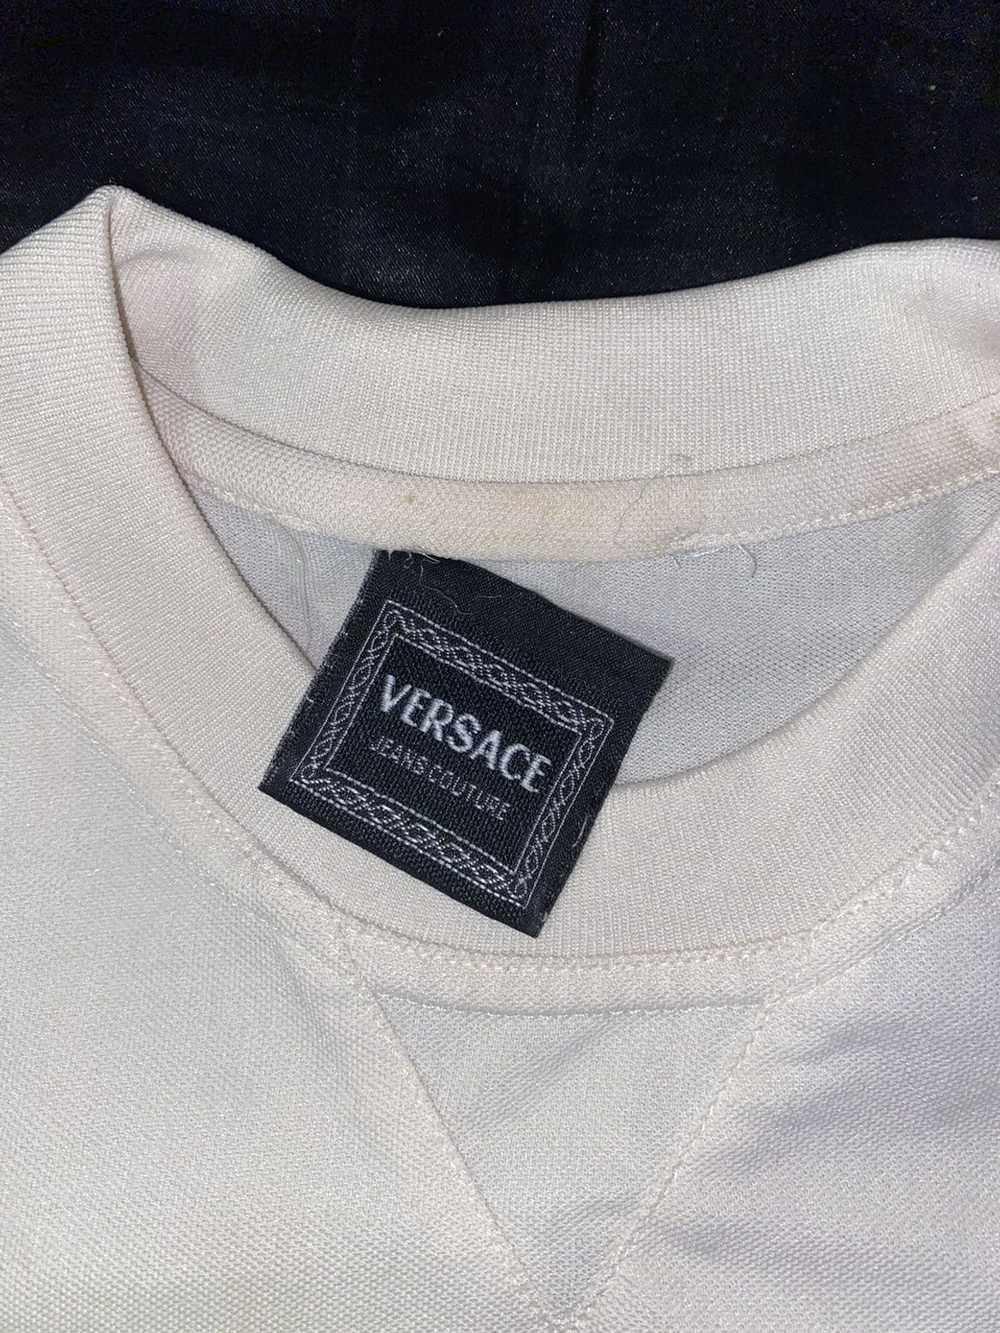 Versace Jeans Couture Versace Jean Couture Shirt - image 3